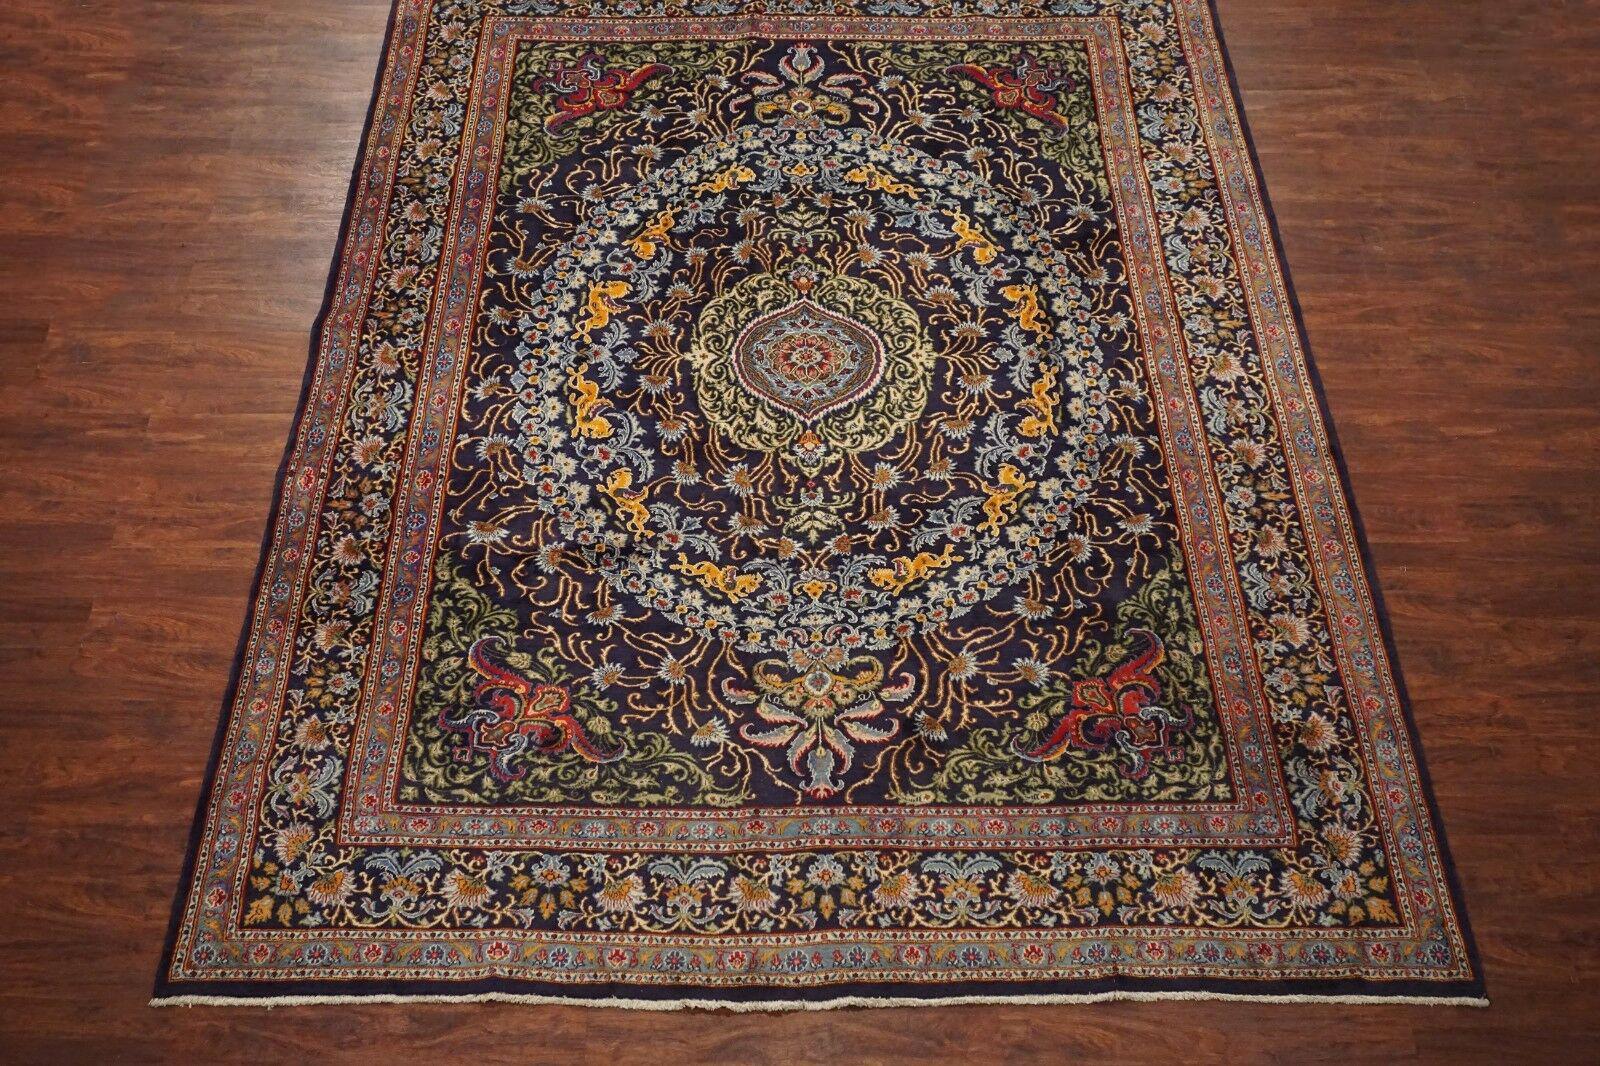 Hand-Knotted 1960s Persian Dorokhsh Rug with Flying Unicorn Motif For Sale